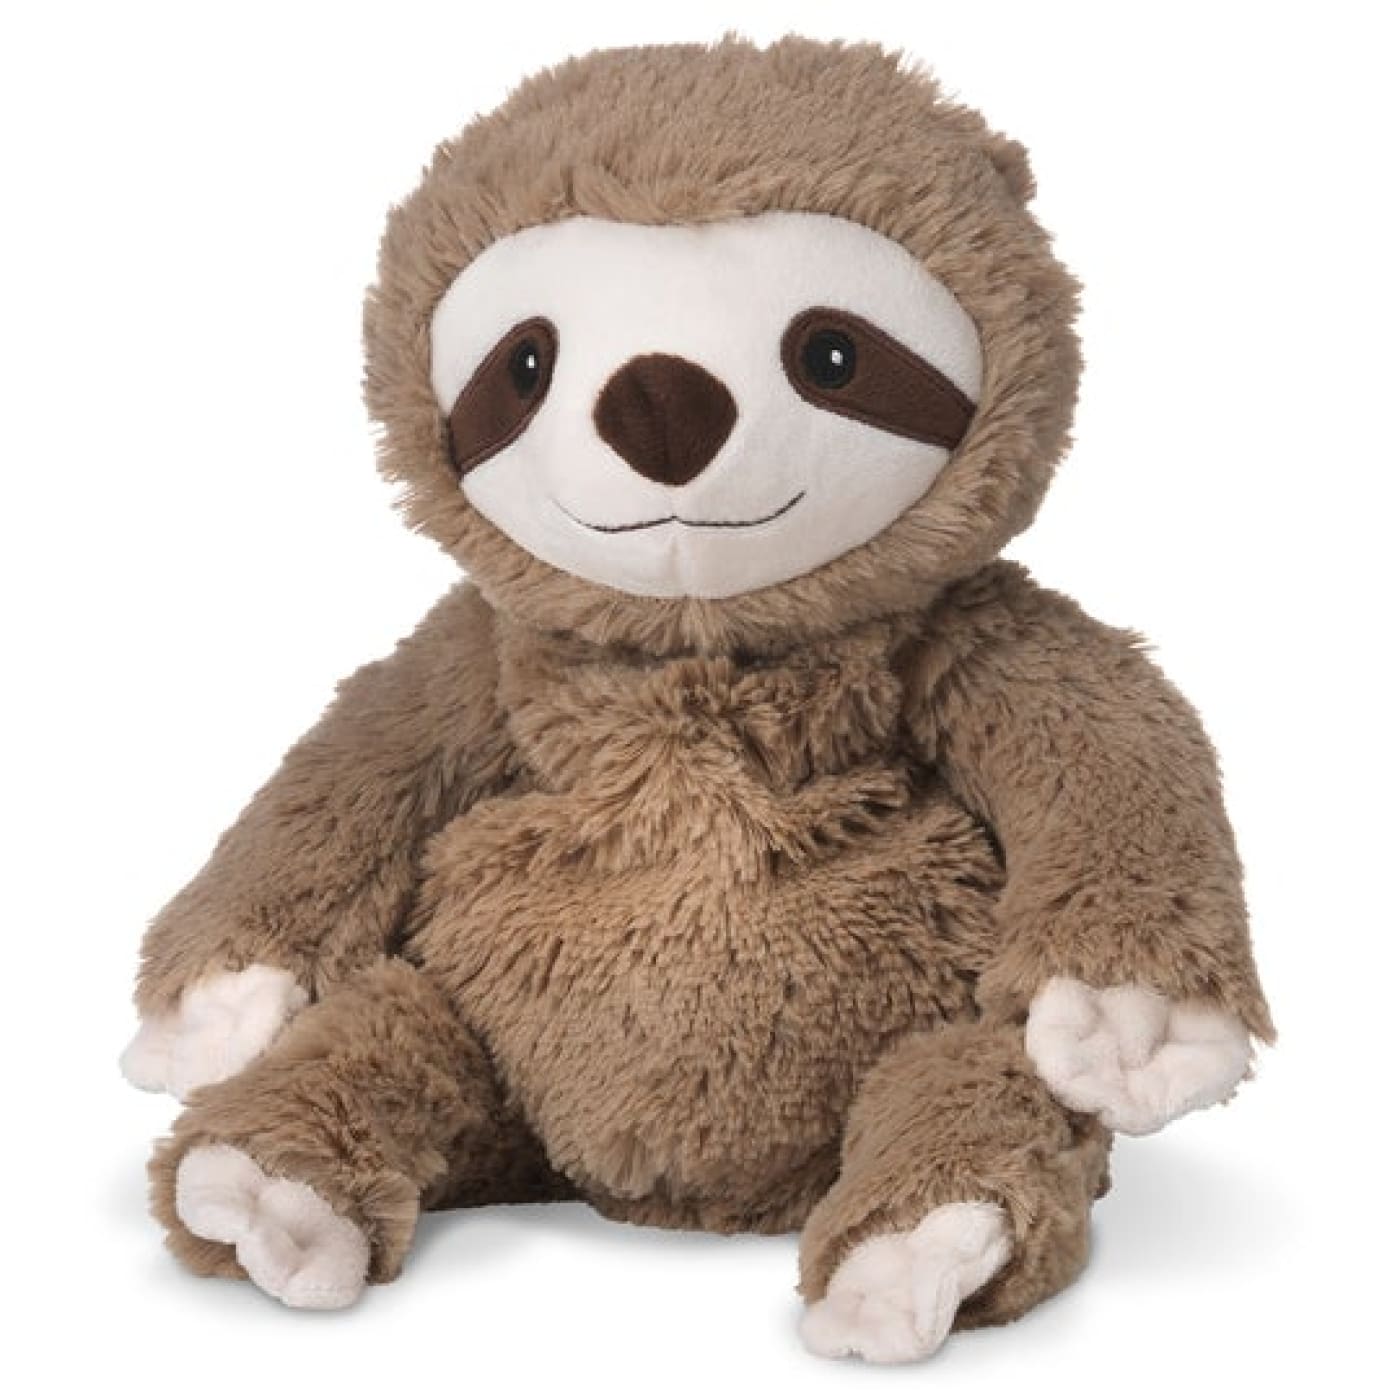 Warmies Cozy Plush - Brownie Sloth - Sloth - HEALTH & HOME SAFETY - THERMOMETERS/MEDICINAL